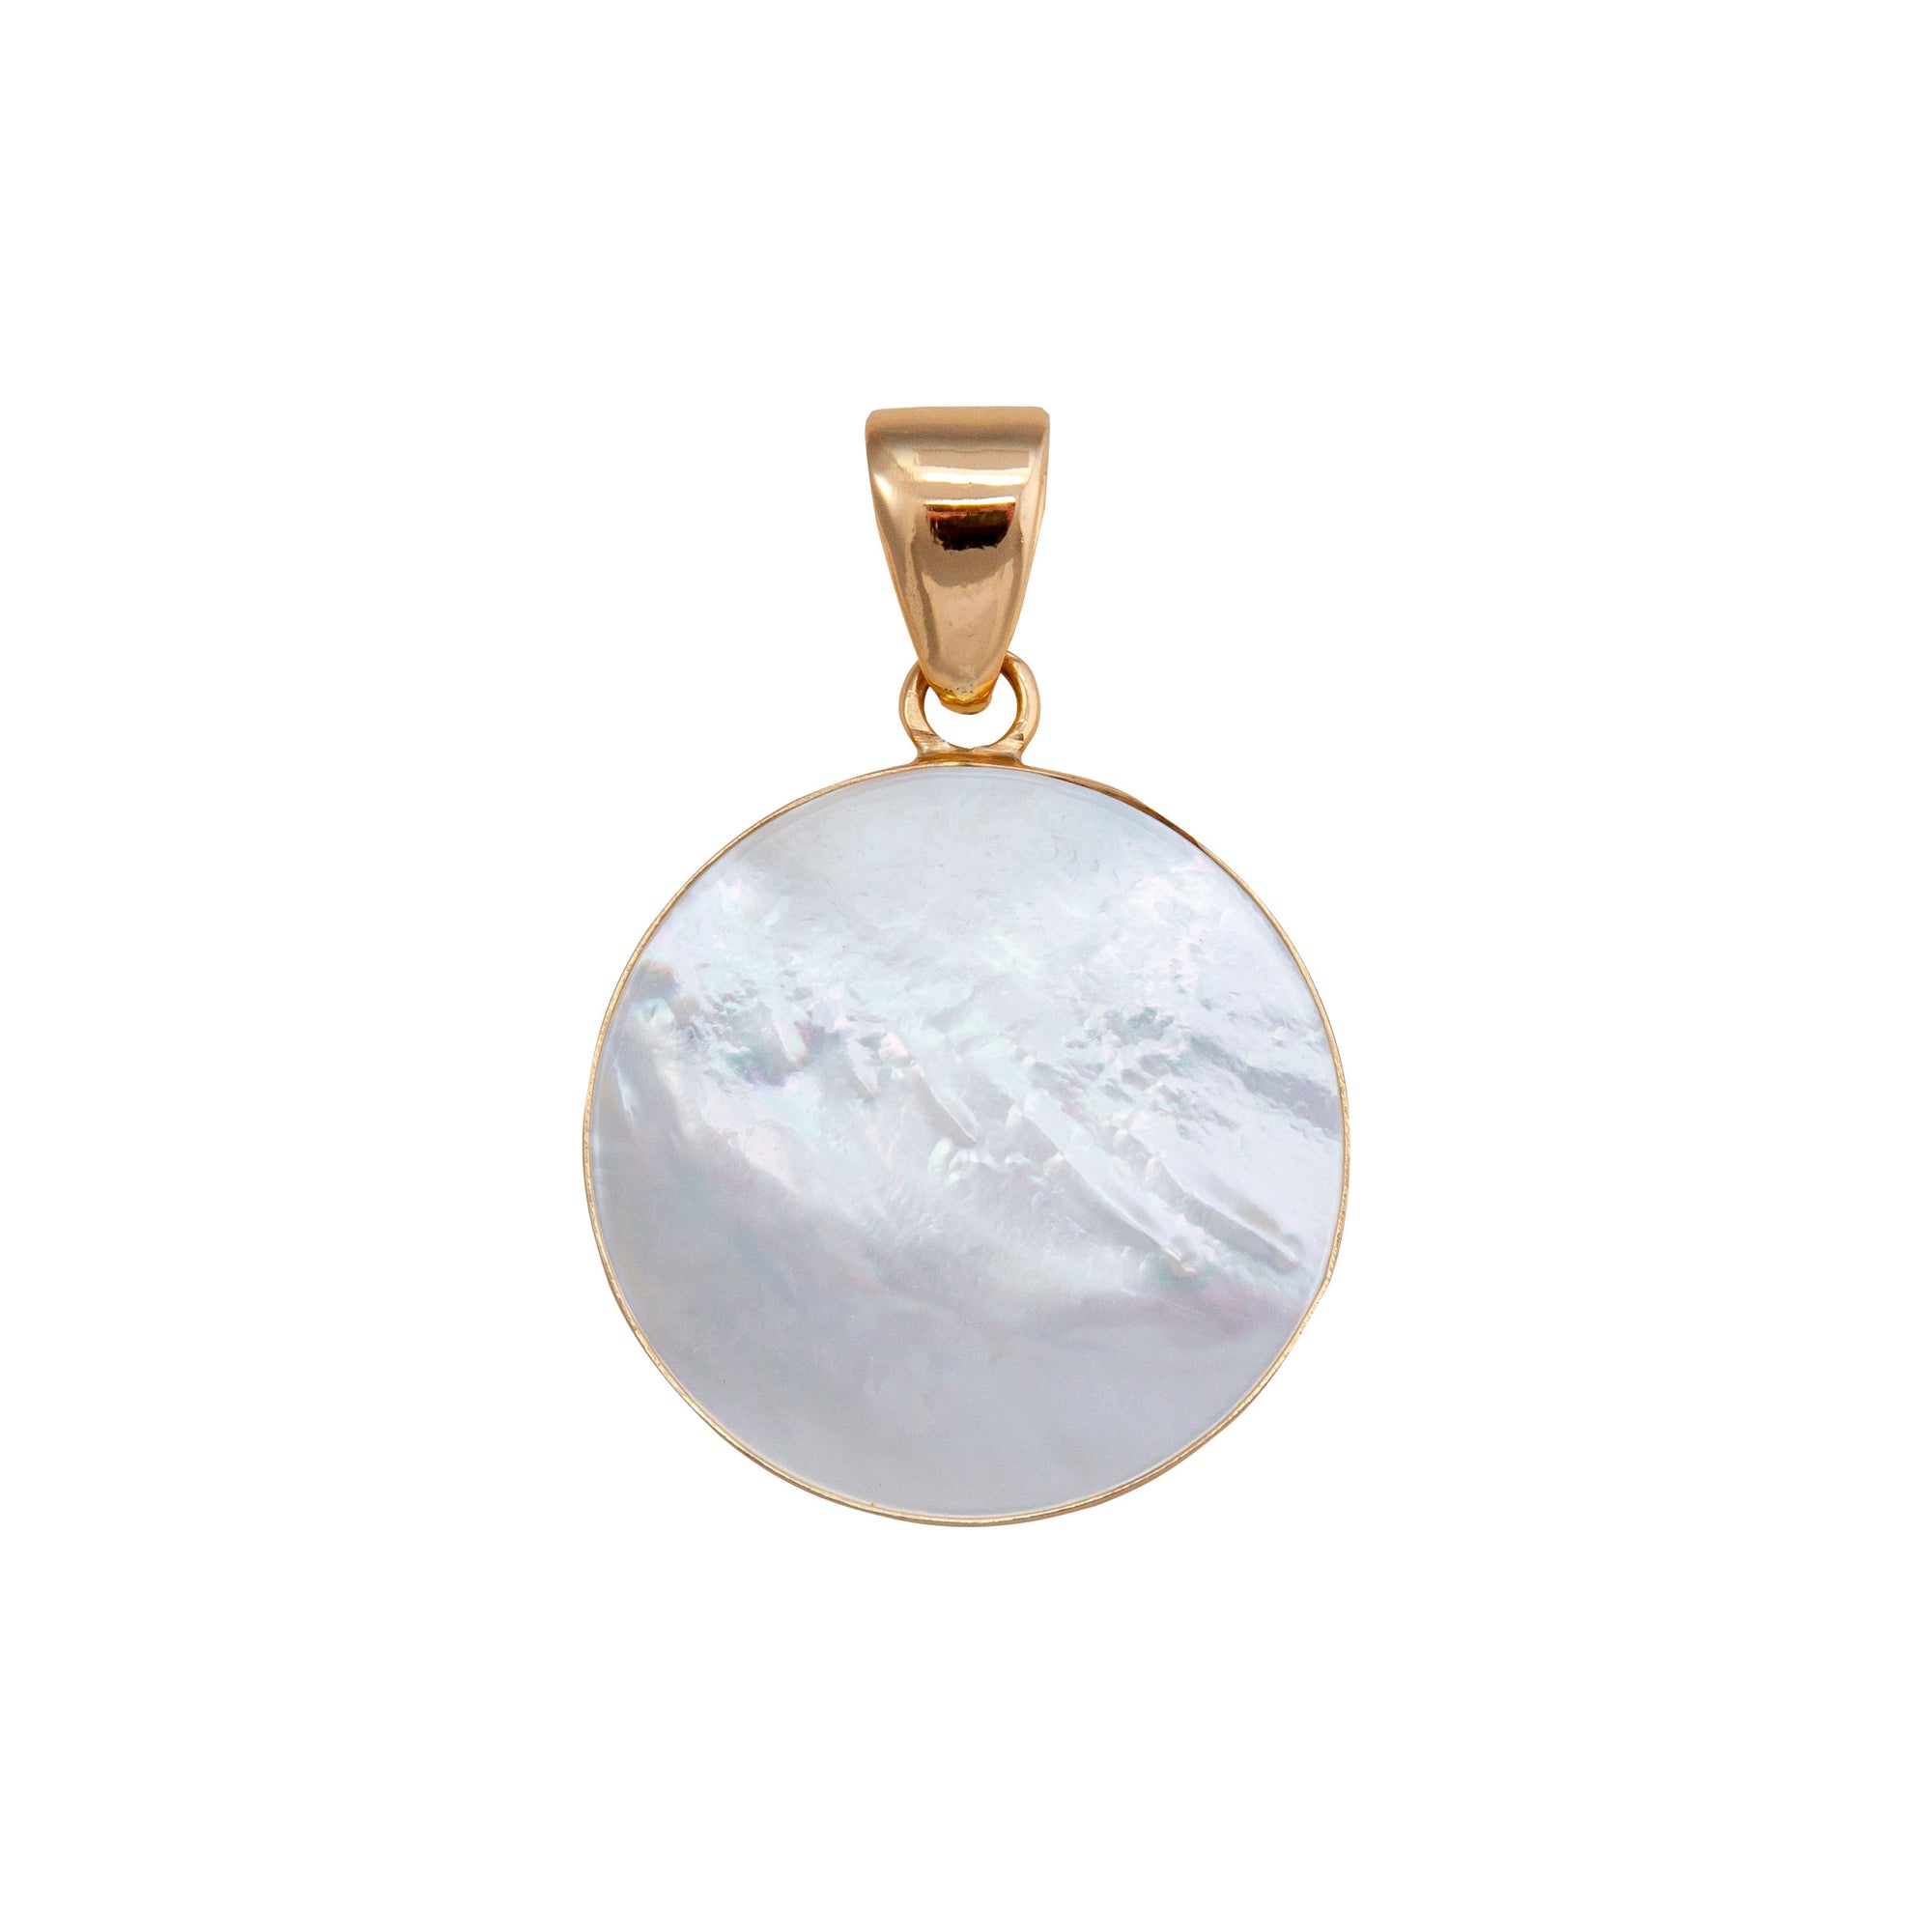 Alchemia Mother of Pearl Round Pendant | Charles Albert Jewelry